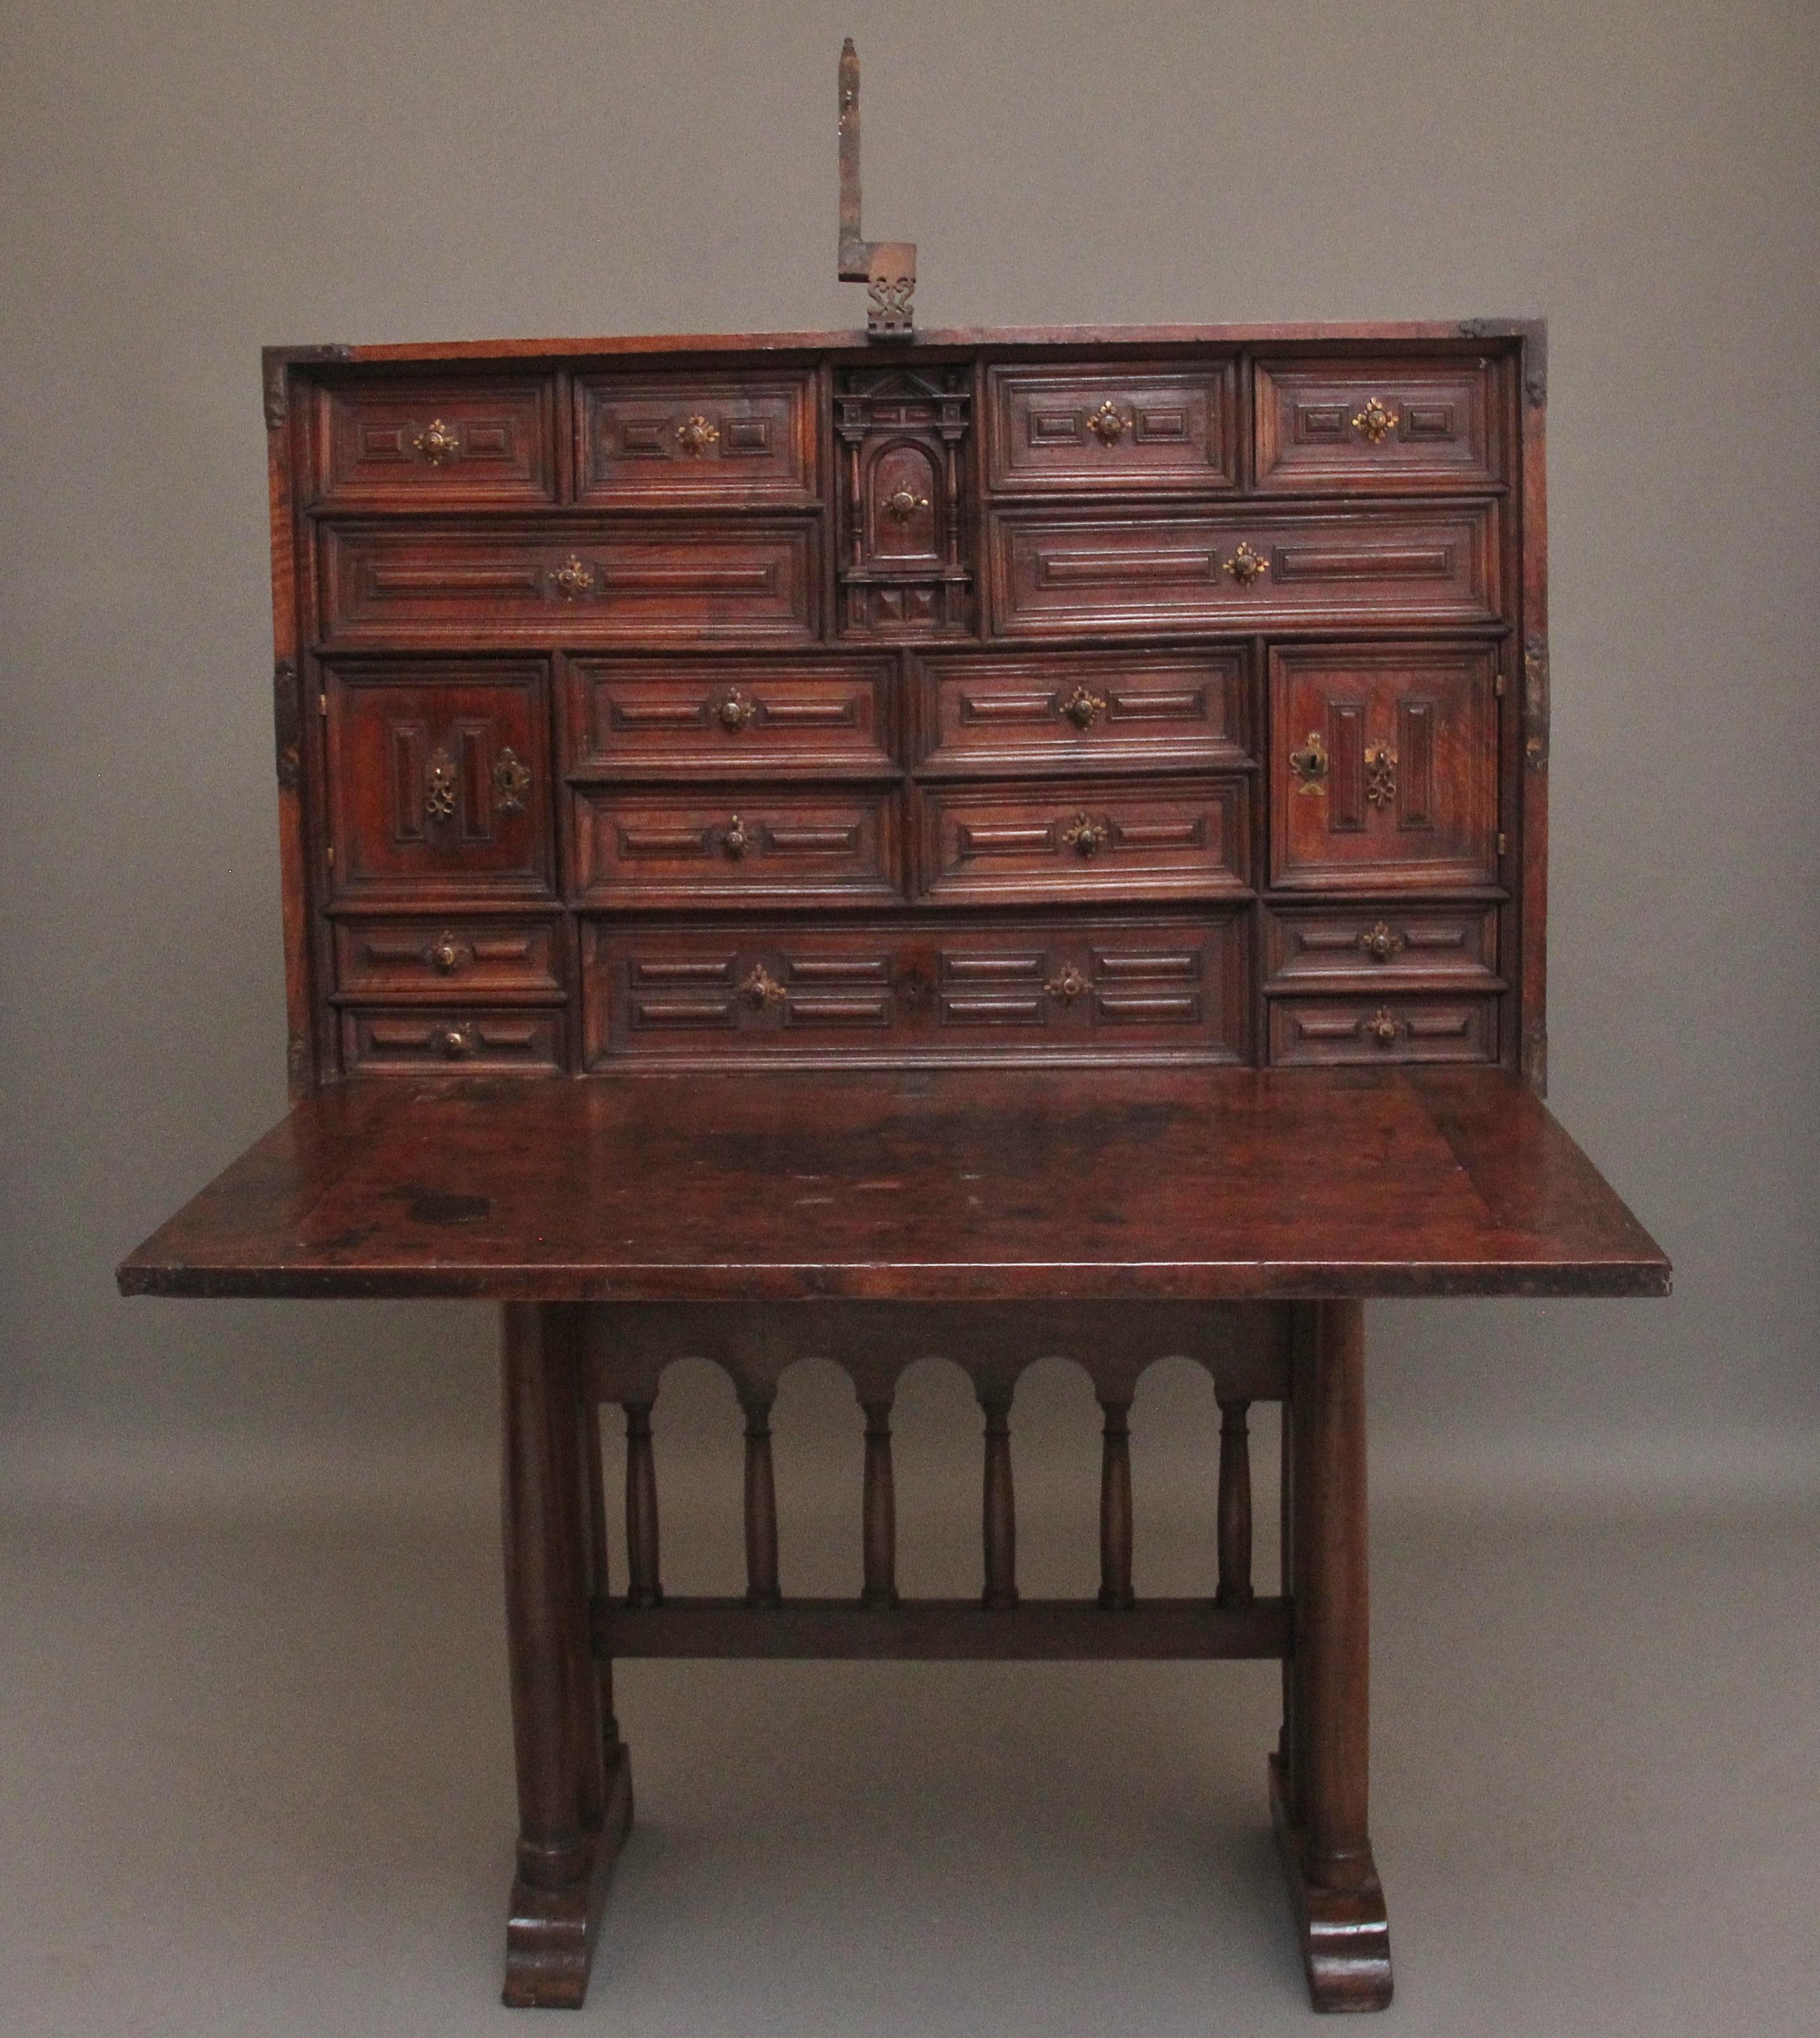 A superb quality 17th Century walnut Vargueno on stand, the rectangular case having the original iron carrying handles either side and strapwork decoration, the front having a shield shaped lock plate at the centre and and engraved lock plates at